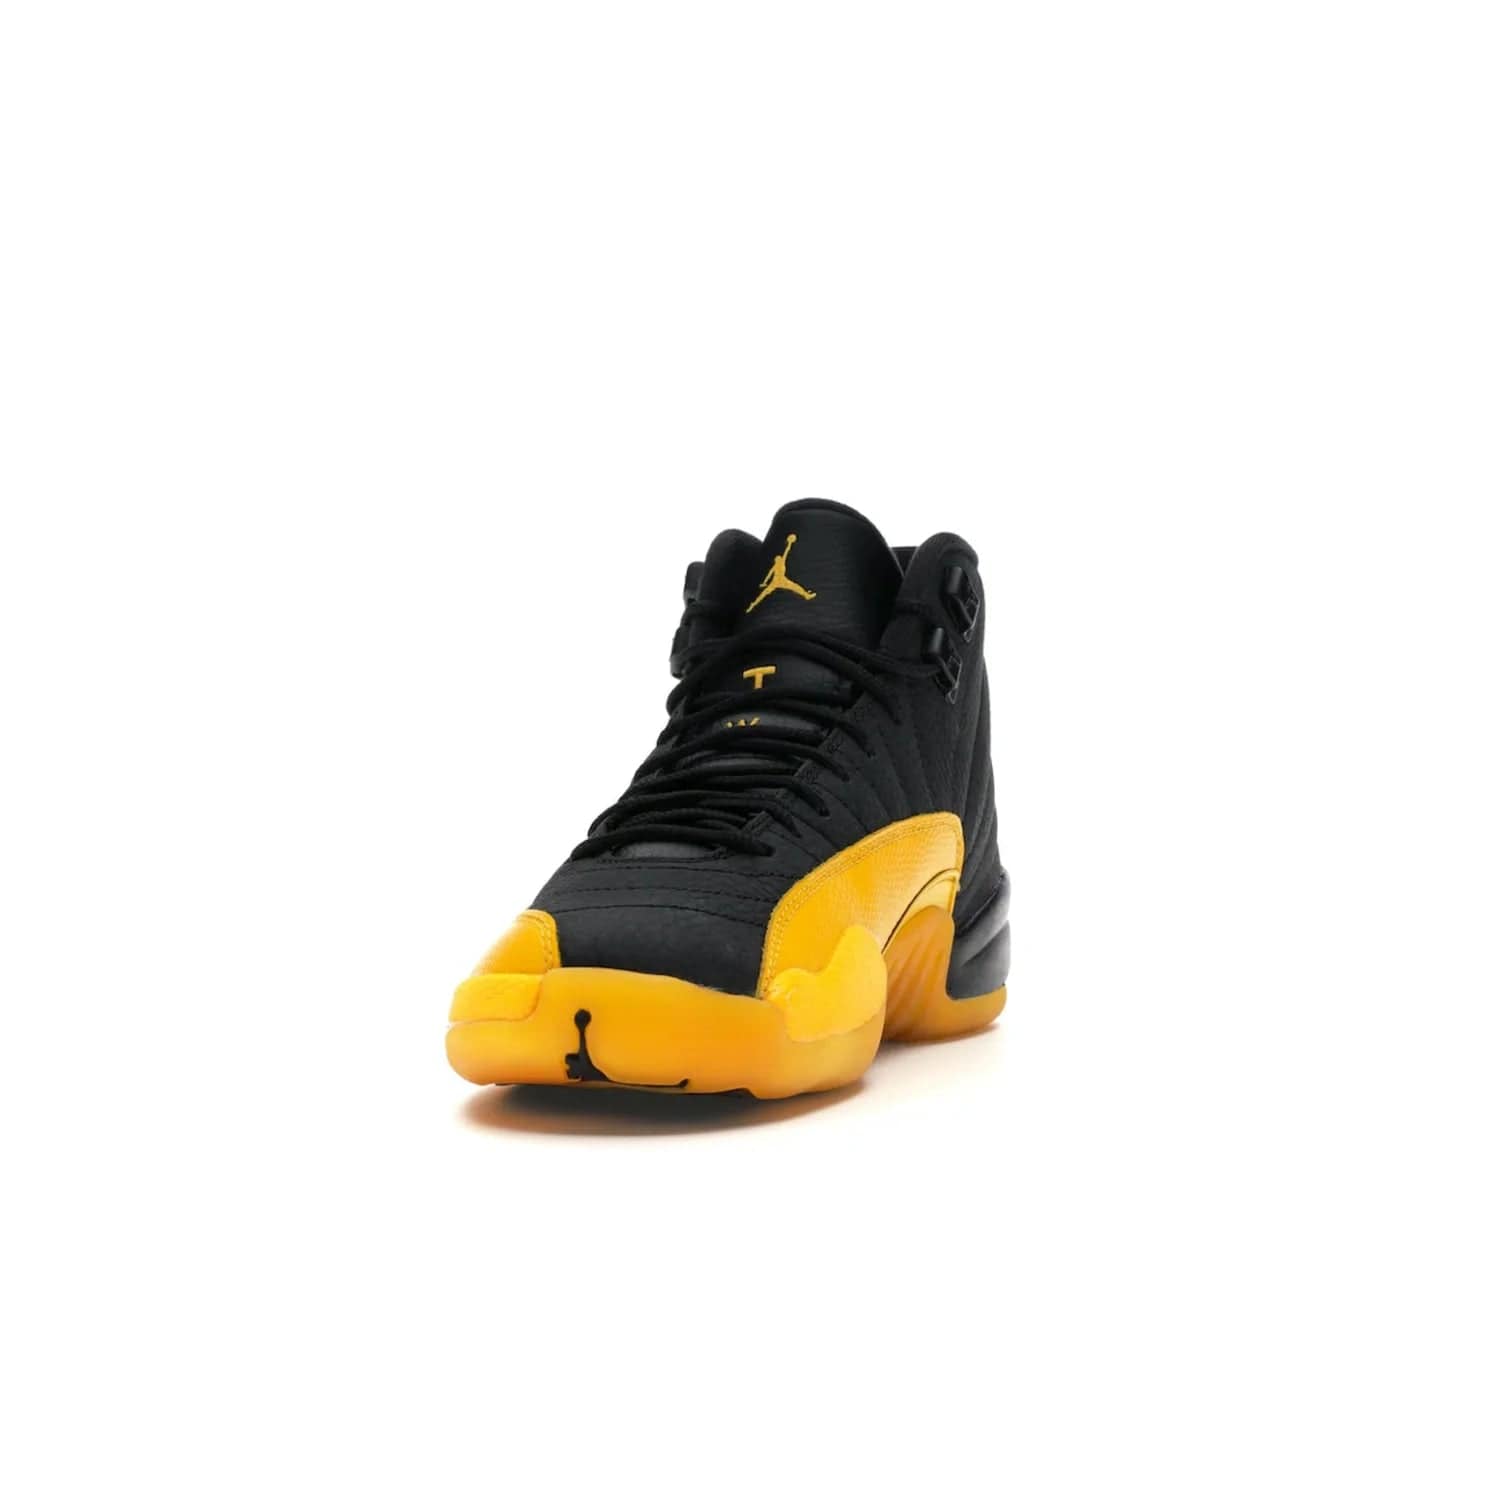 Jordan 12 Retro Black University Gold (GS) - Image 12 - Only at www.BallersClubKickz.com - Upgrade your kid's shoe collection with the Jordan 12 Retro Black University Gold. With classic style, black tumbled leather upper, and University Gold accents, it's a great summer look. Out July 2020.